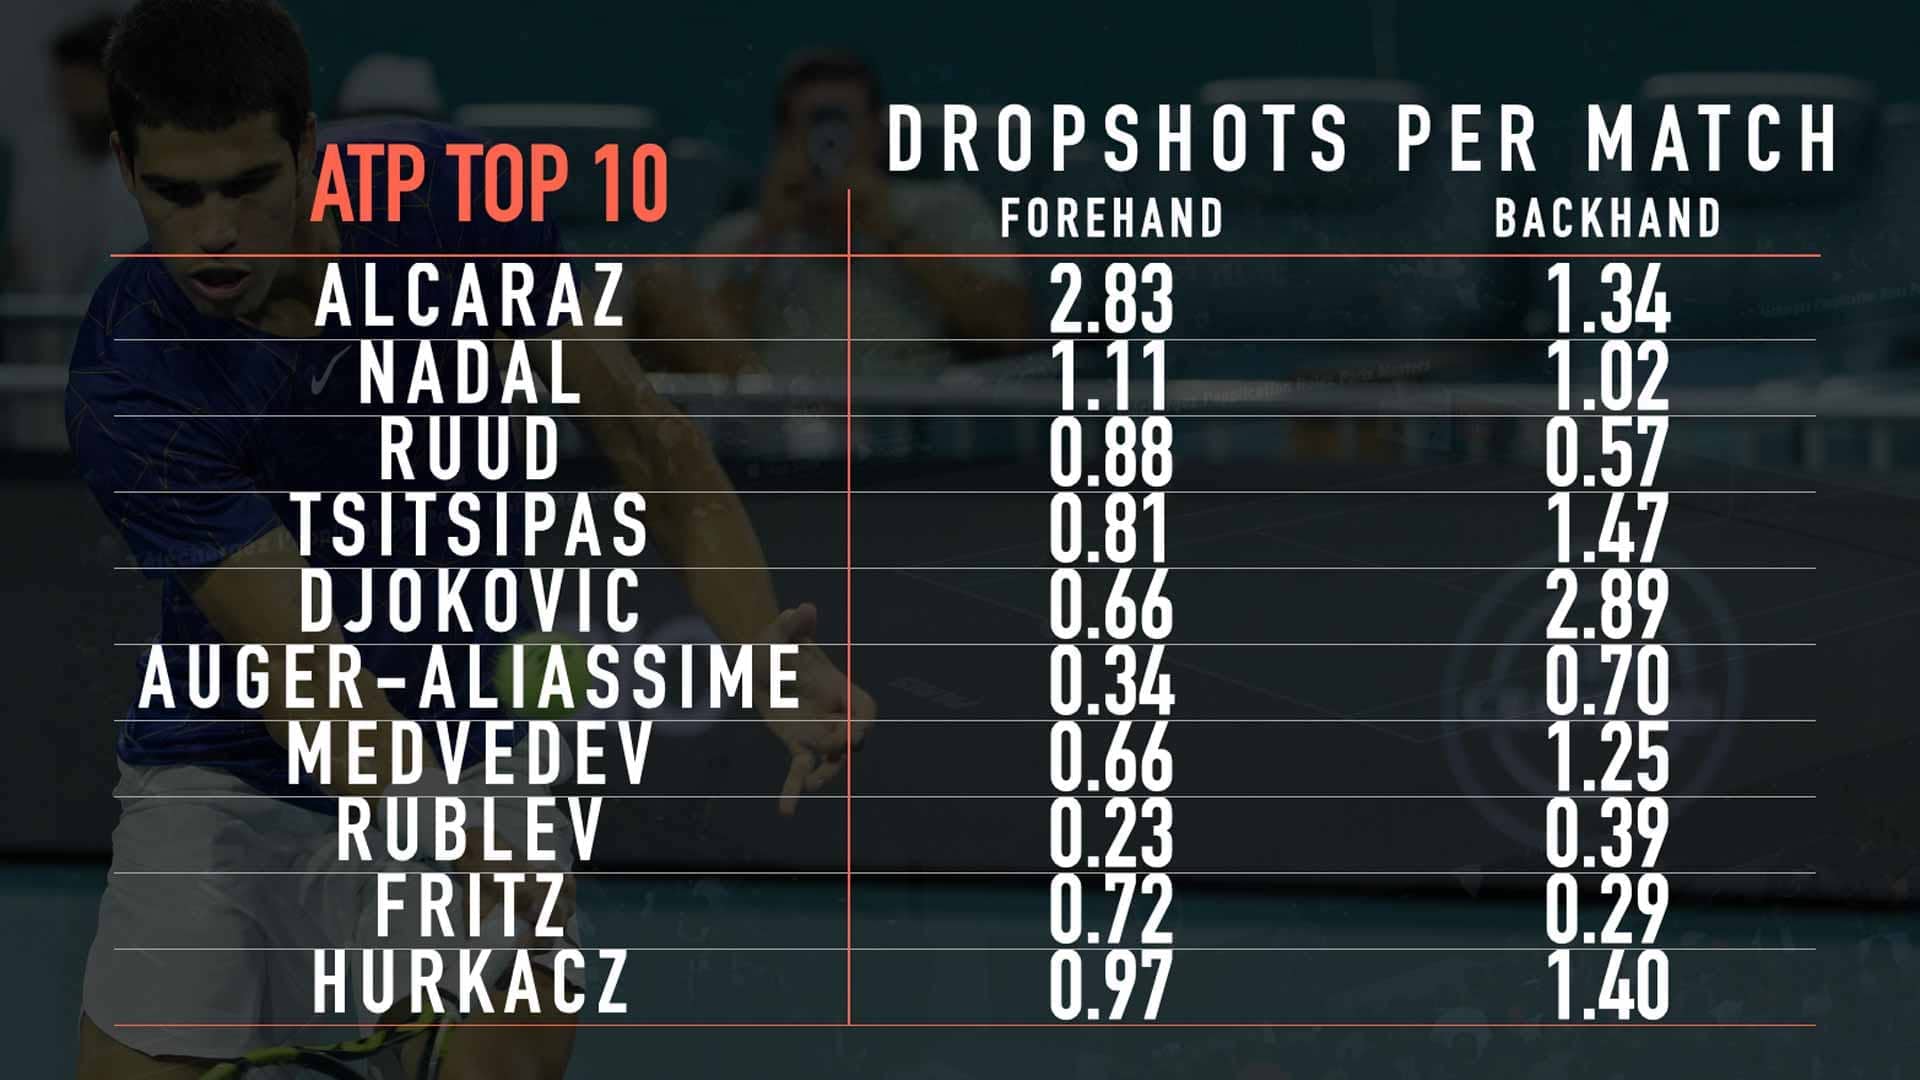 Forehand and backhand drop shot usage for players in the ATP Top 10.  